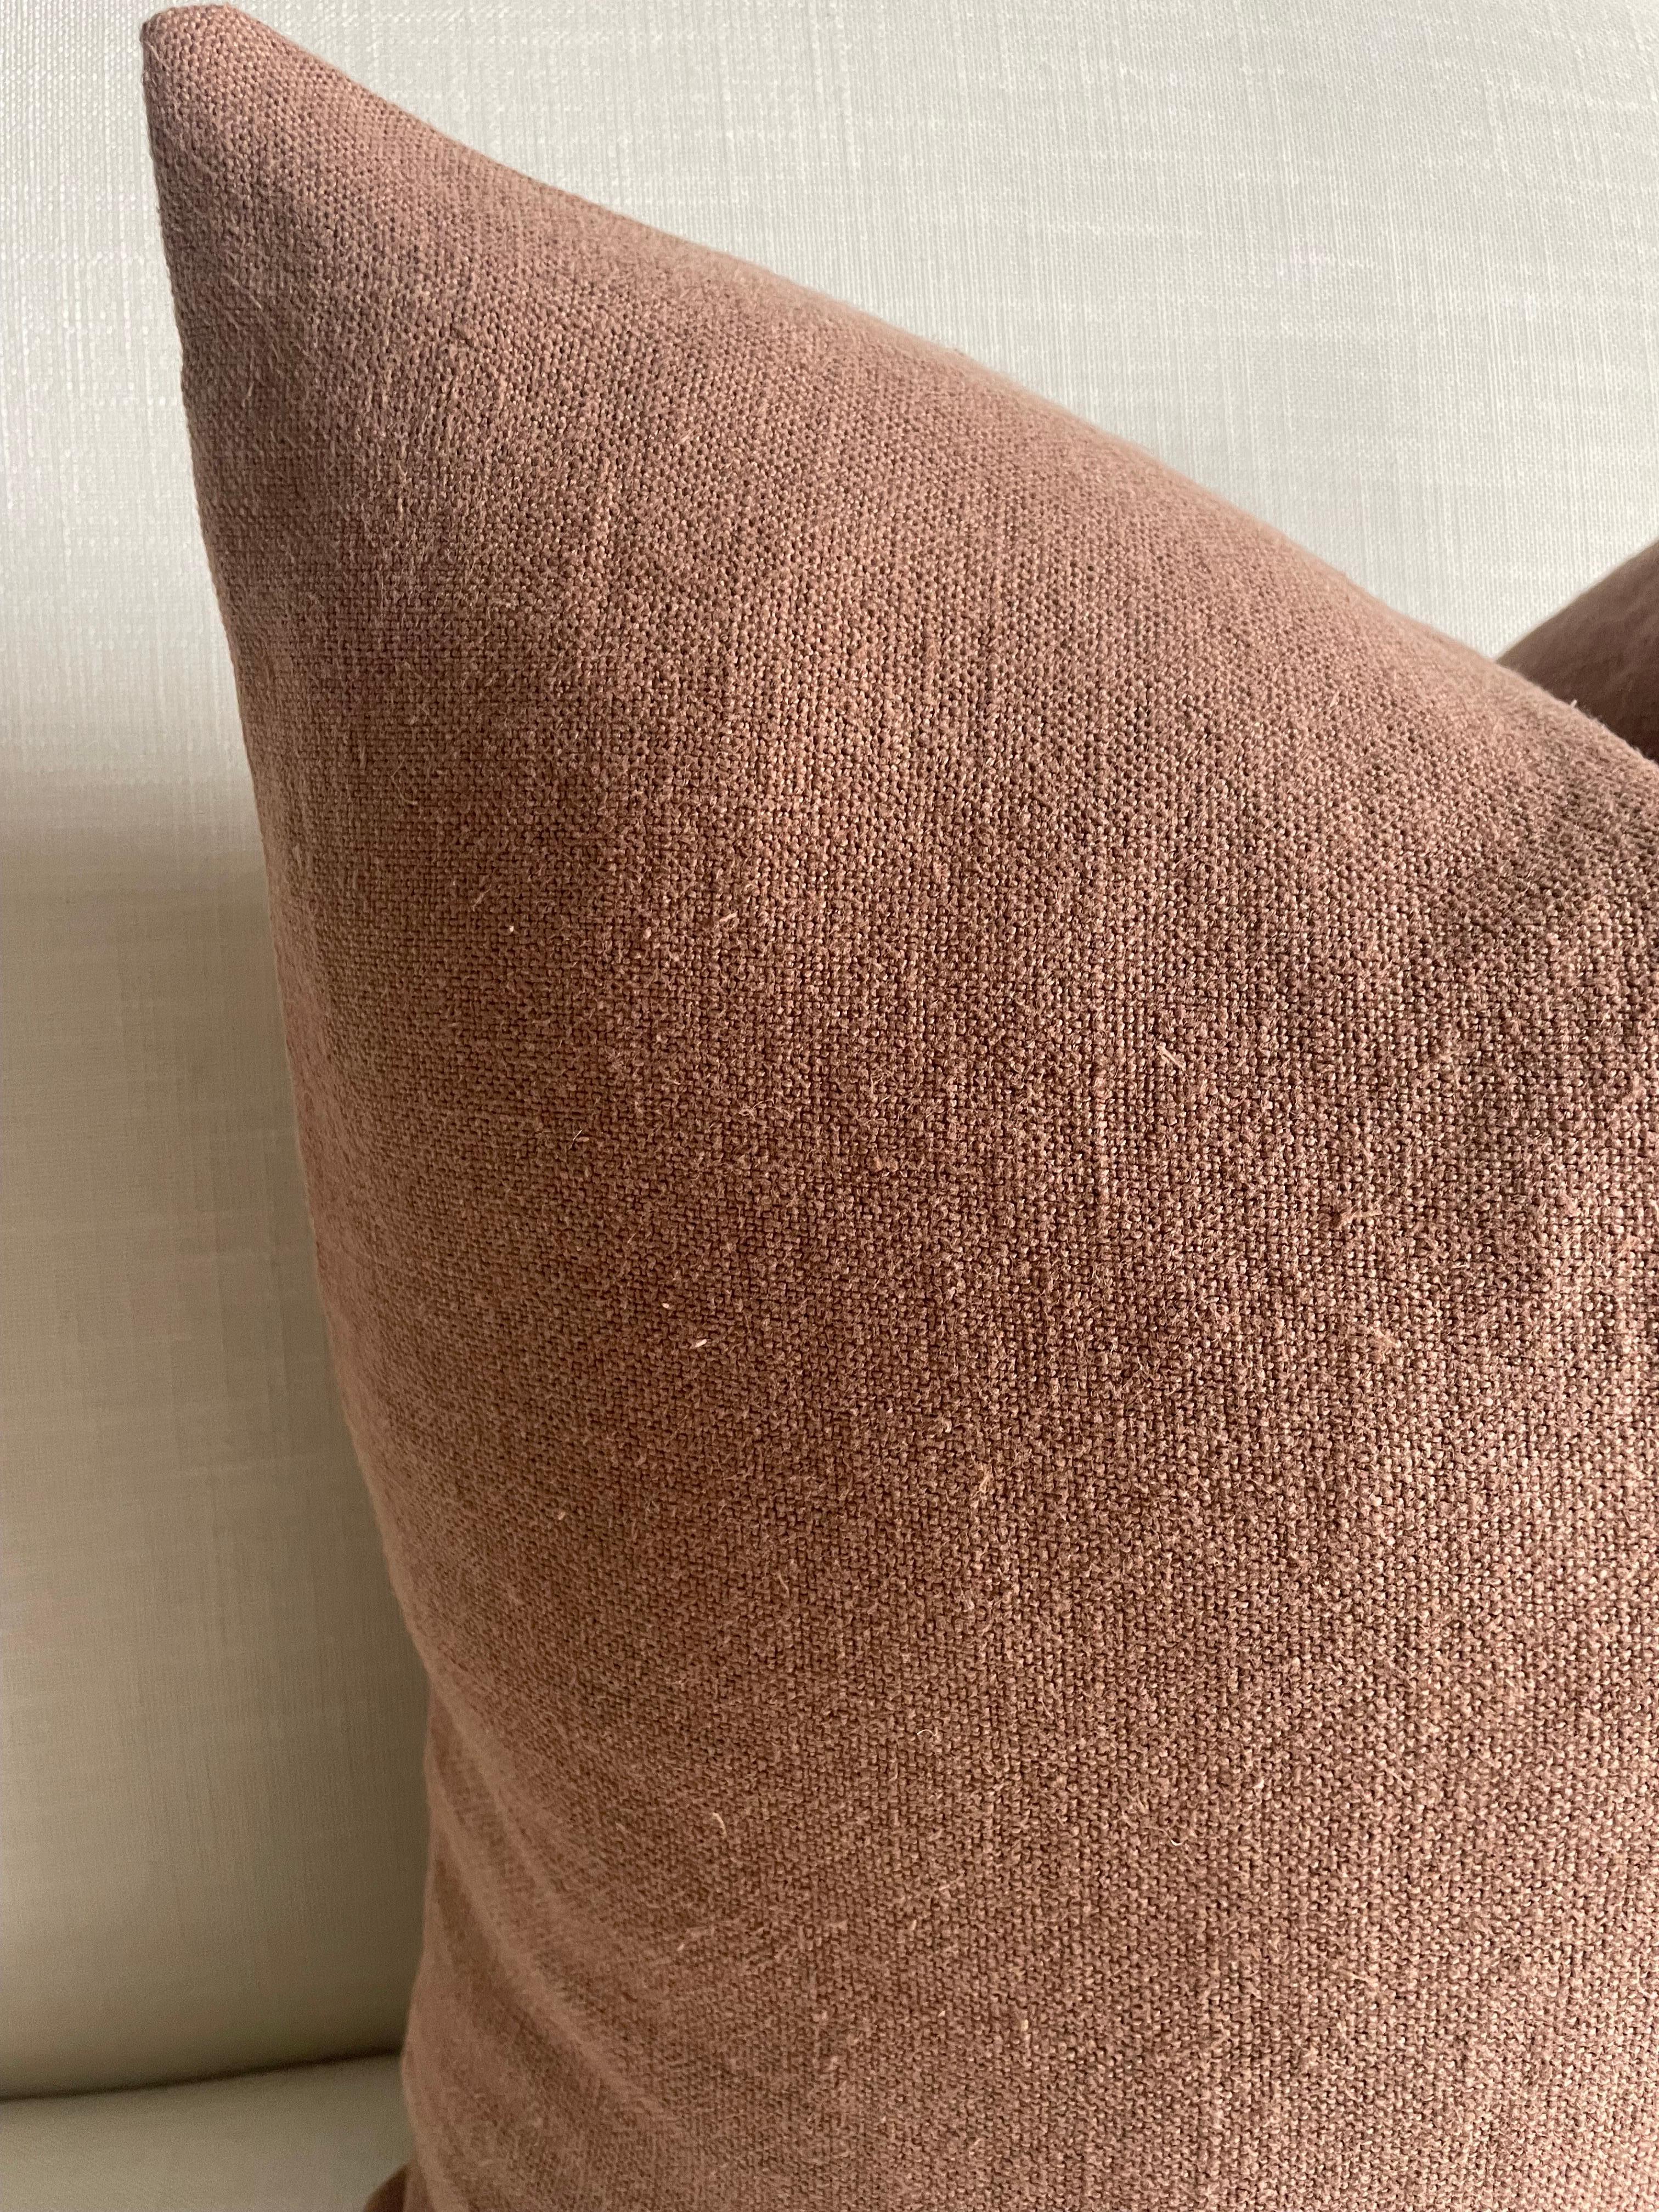 Contemporary Belgian Linen Pillow Cover in Cinnamon For Sale